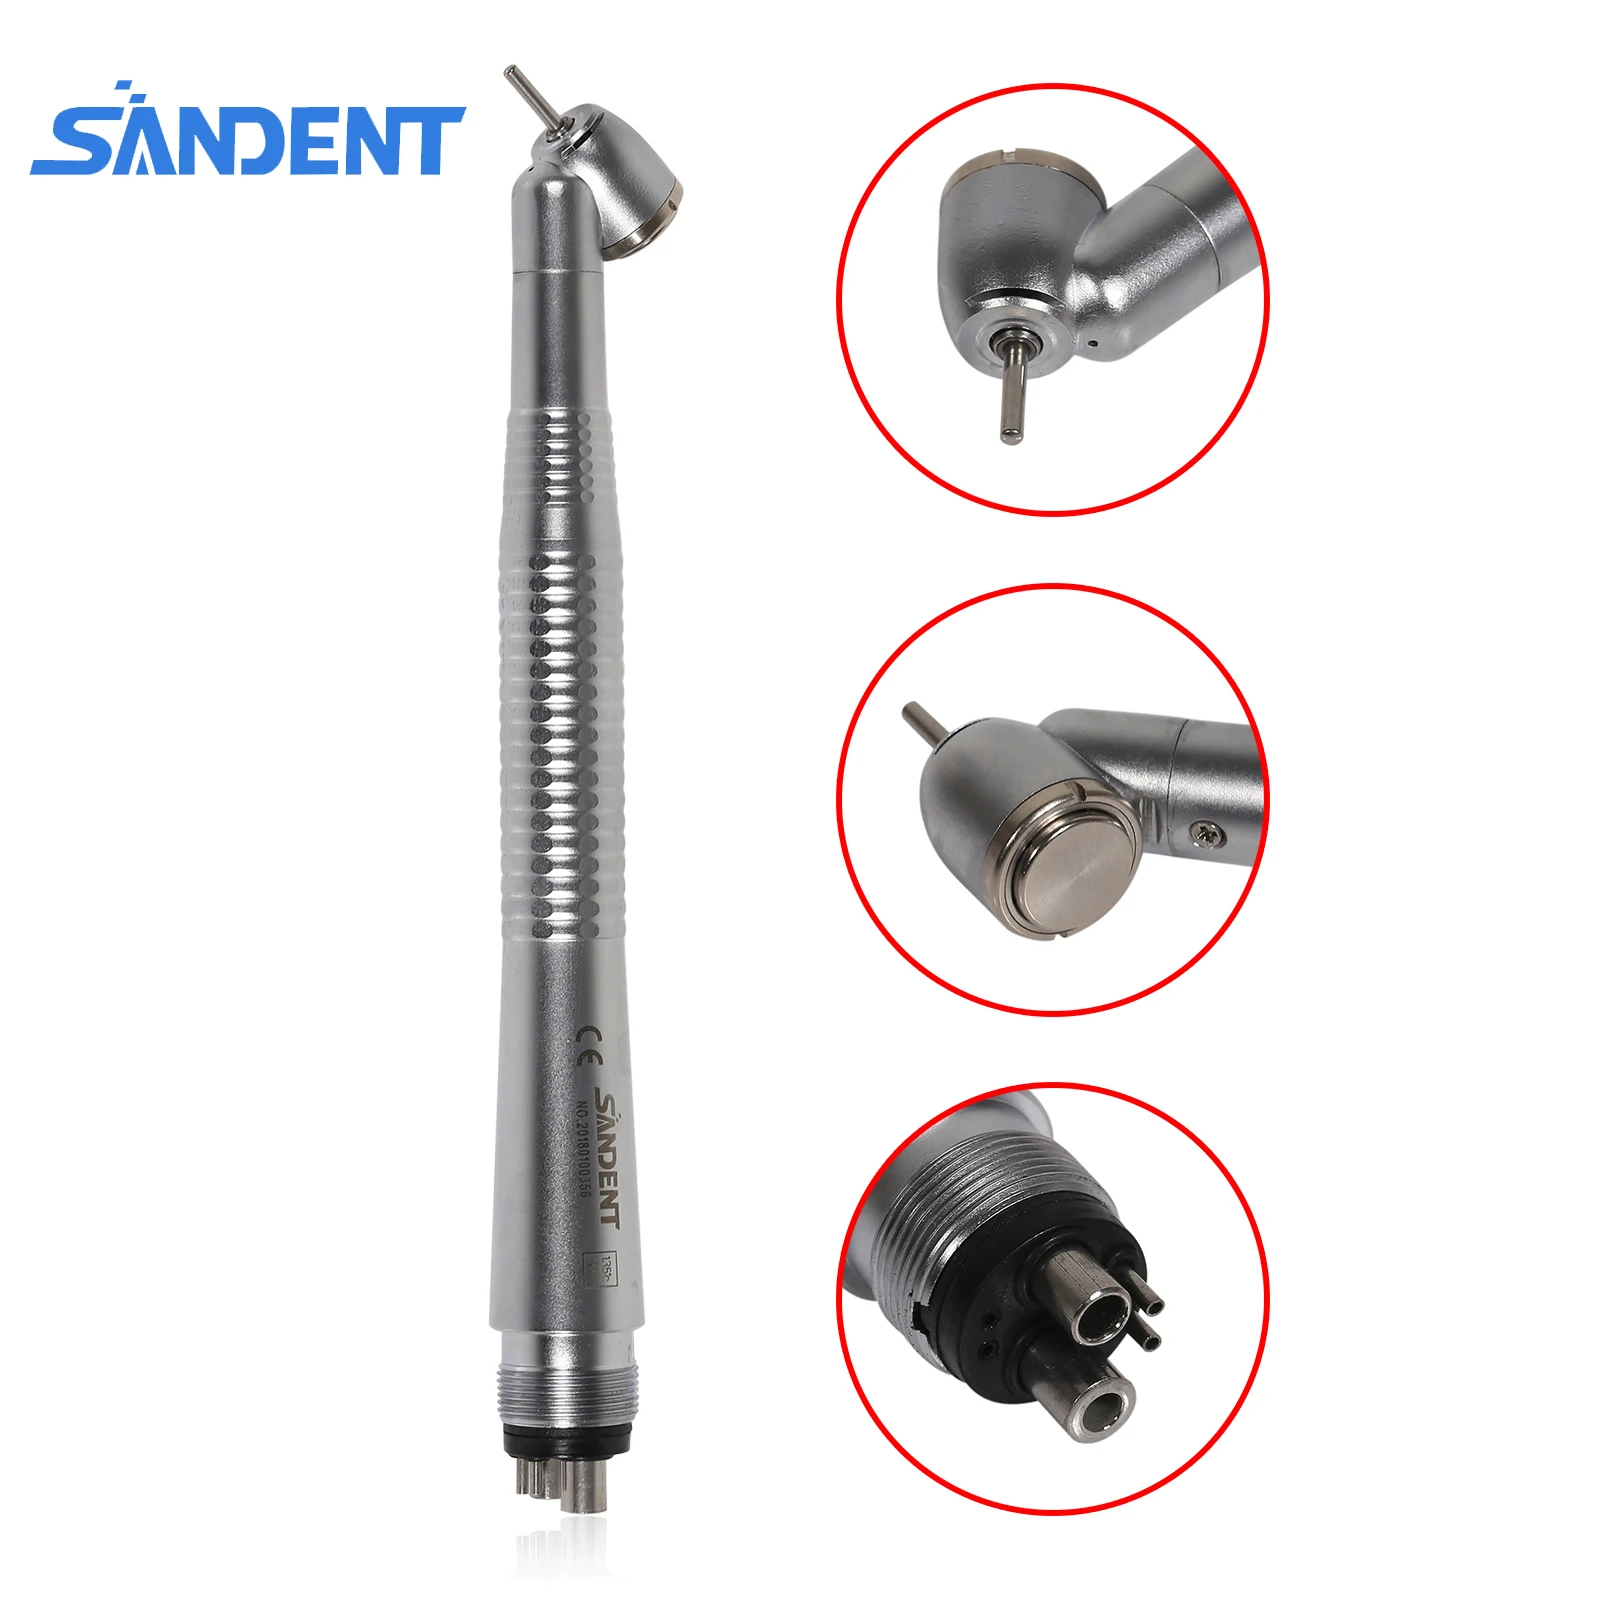 SANDENT Dental High Speed Handpiece 45 Degree Head 4 Hole Single Water Spring Push Button Type Dentist Turbine Fit NSK CA4 being dental low speed inner water led fiber optic implant nose cone straight handpiece 201sh 202sh 202shb fit nsk kavo